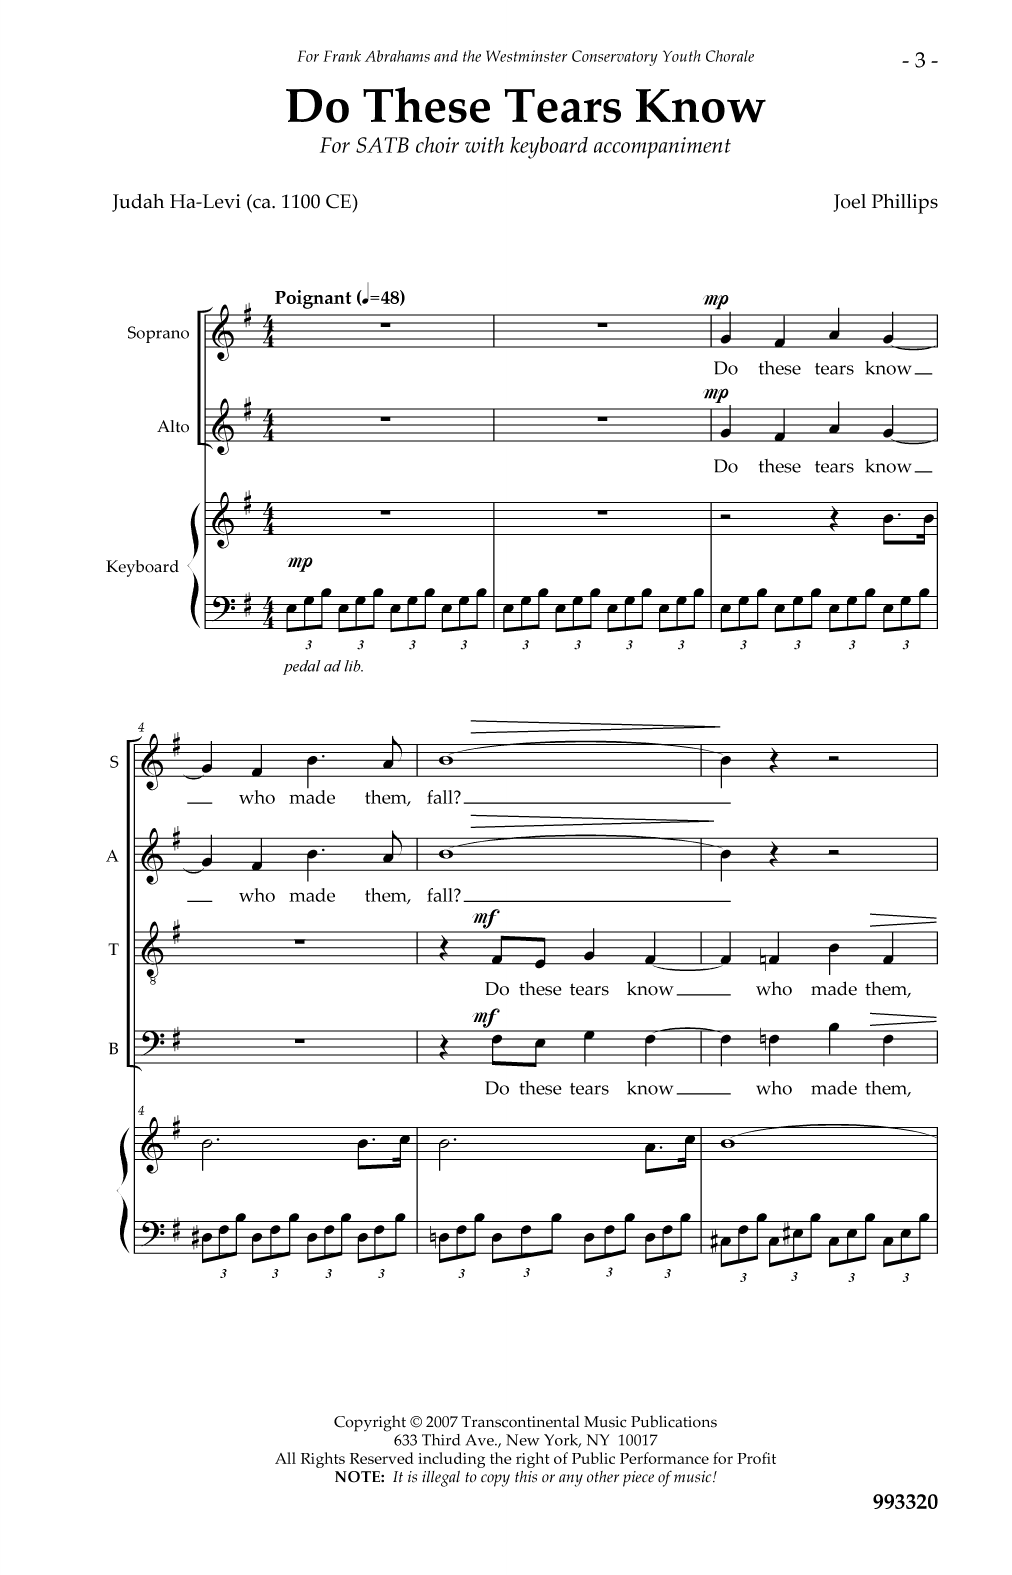 Download Joel Phillips Do These Tears Know Sheet Music